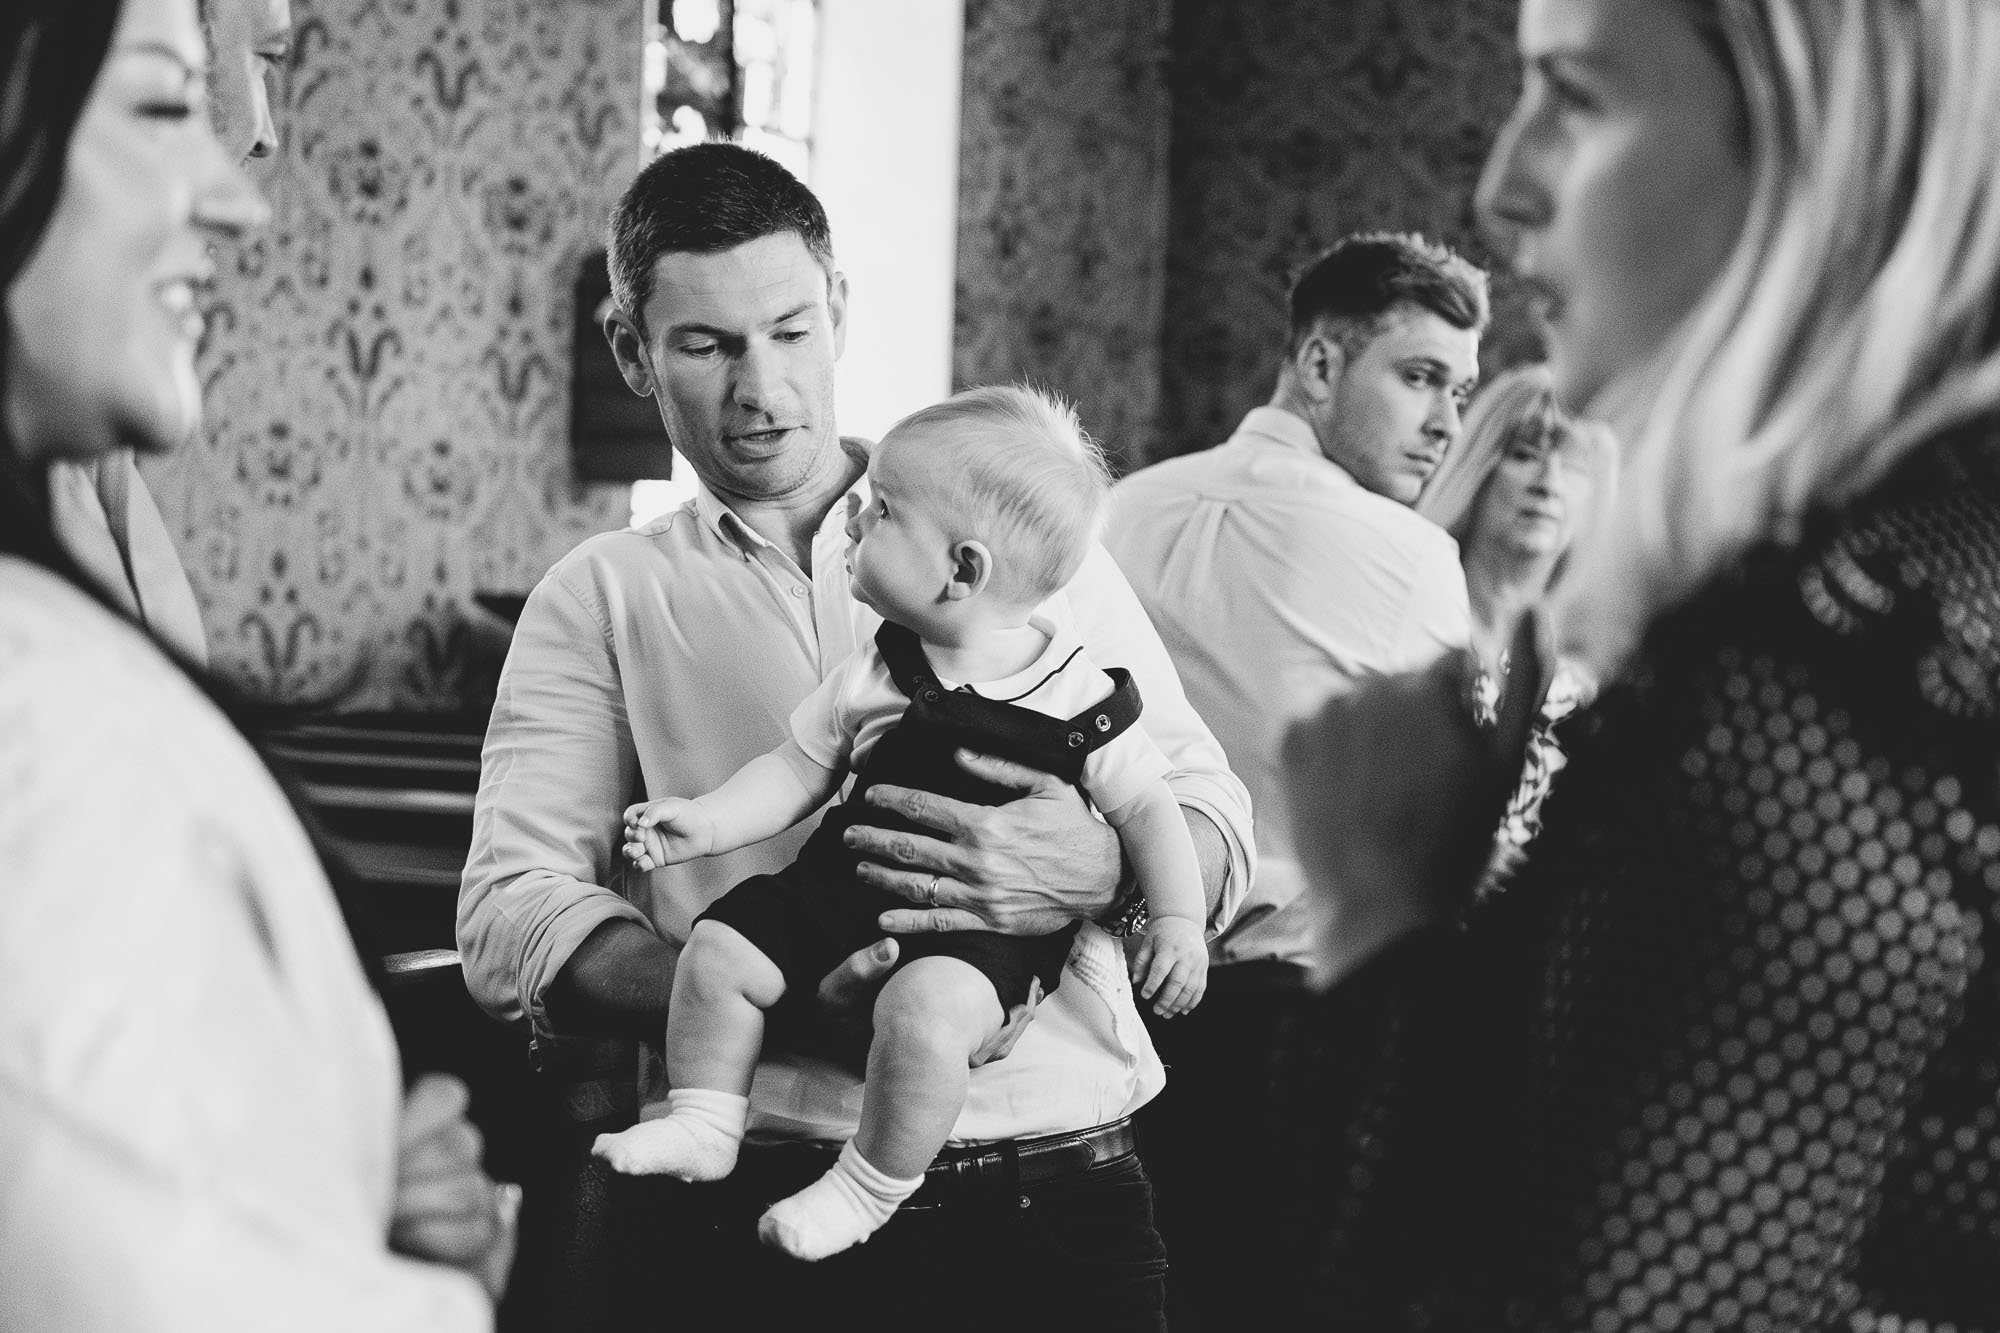 dad-son-christening-ceremony-sussex-christening-photography-black-and-white.jpg